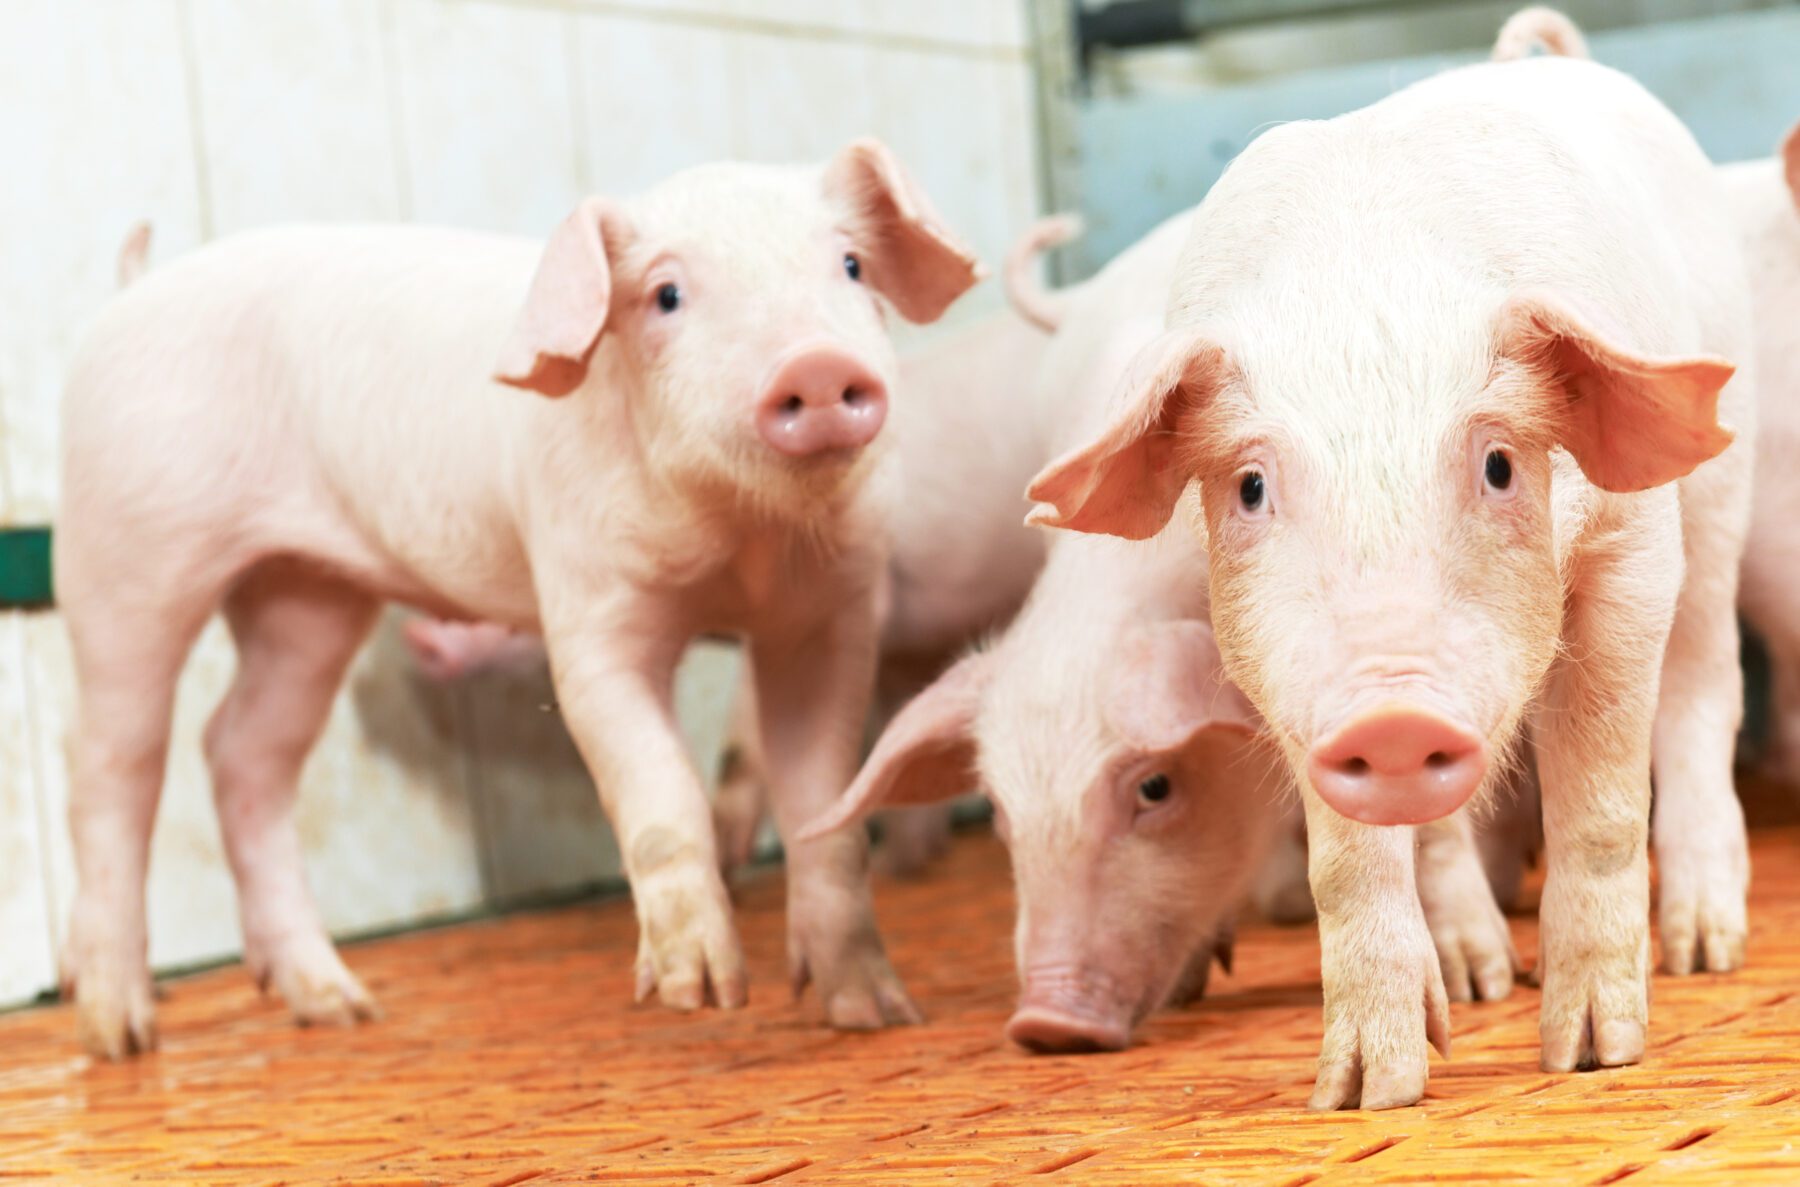 Use of Protected Benzoic Acid on Weaned Piglets' Diet